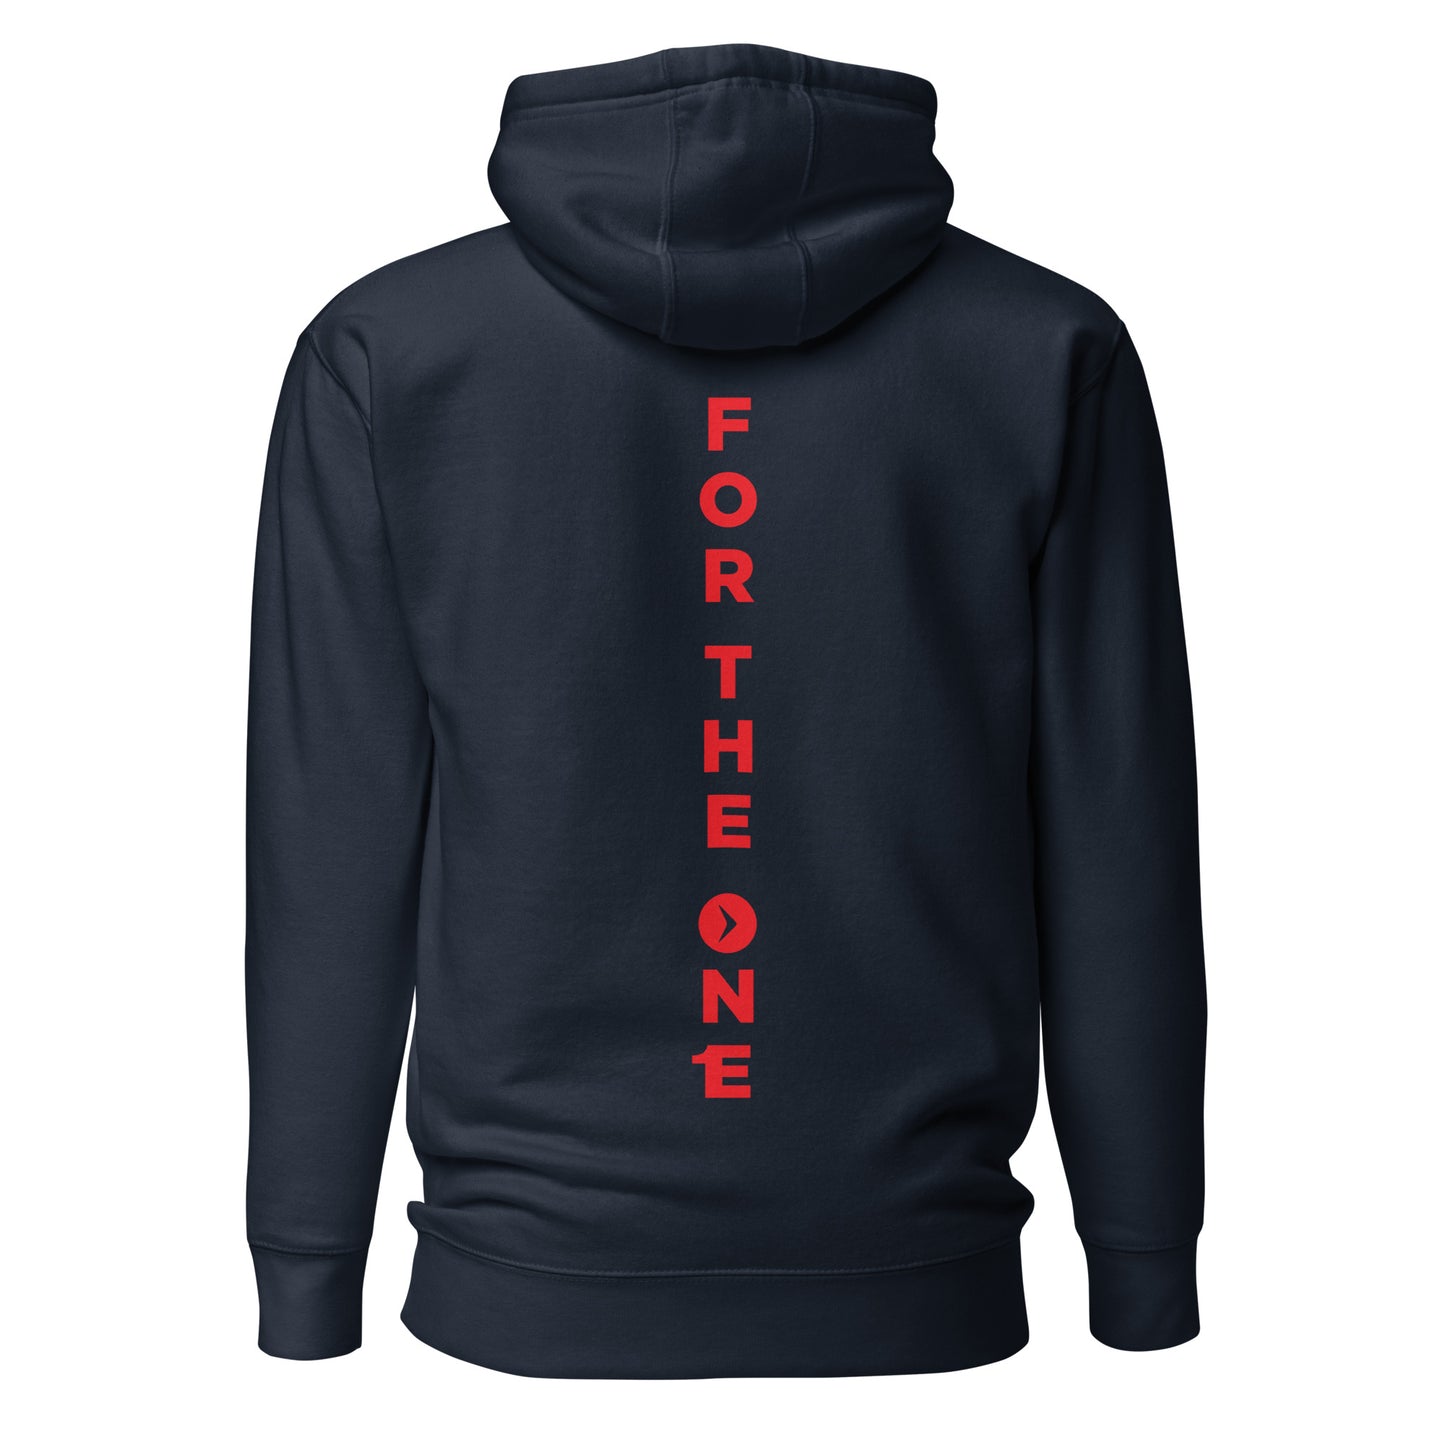 For The One - Unisex Hoodie